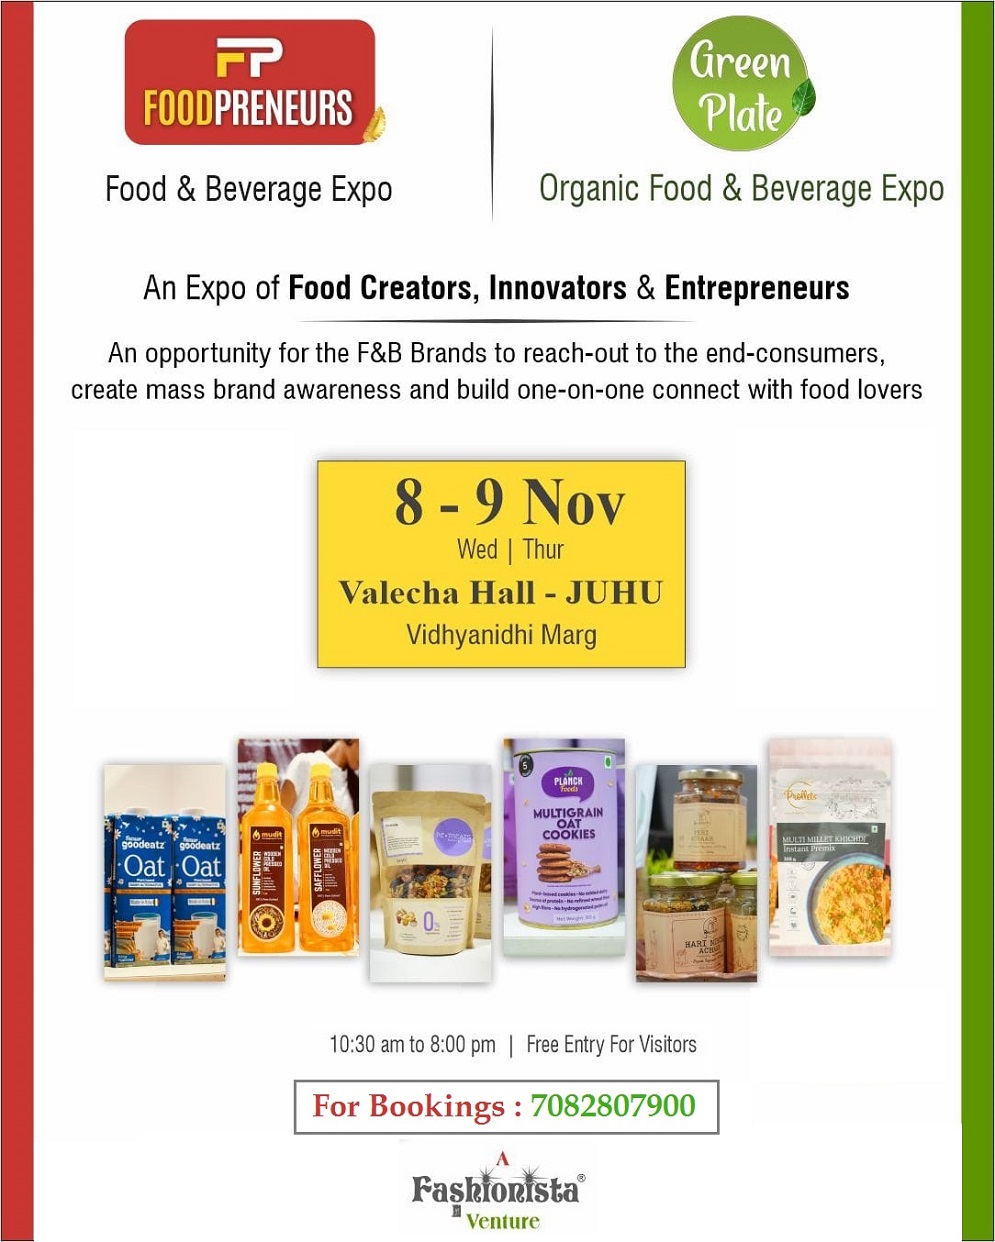 Festive Special - Food & Beverage Expo